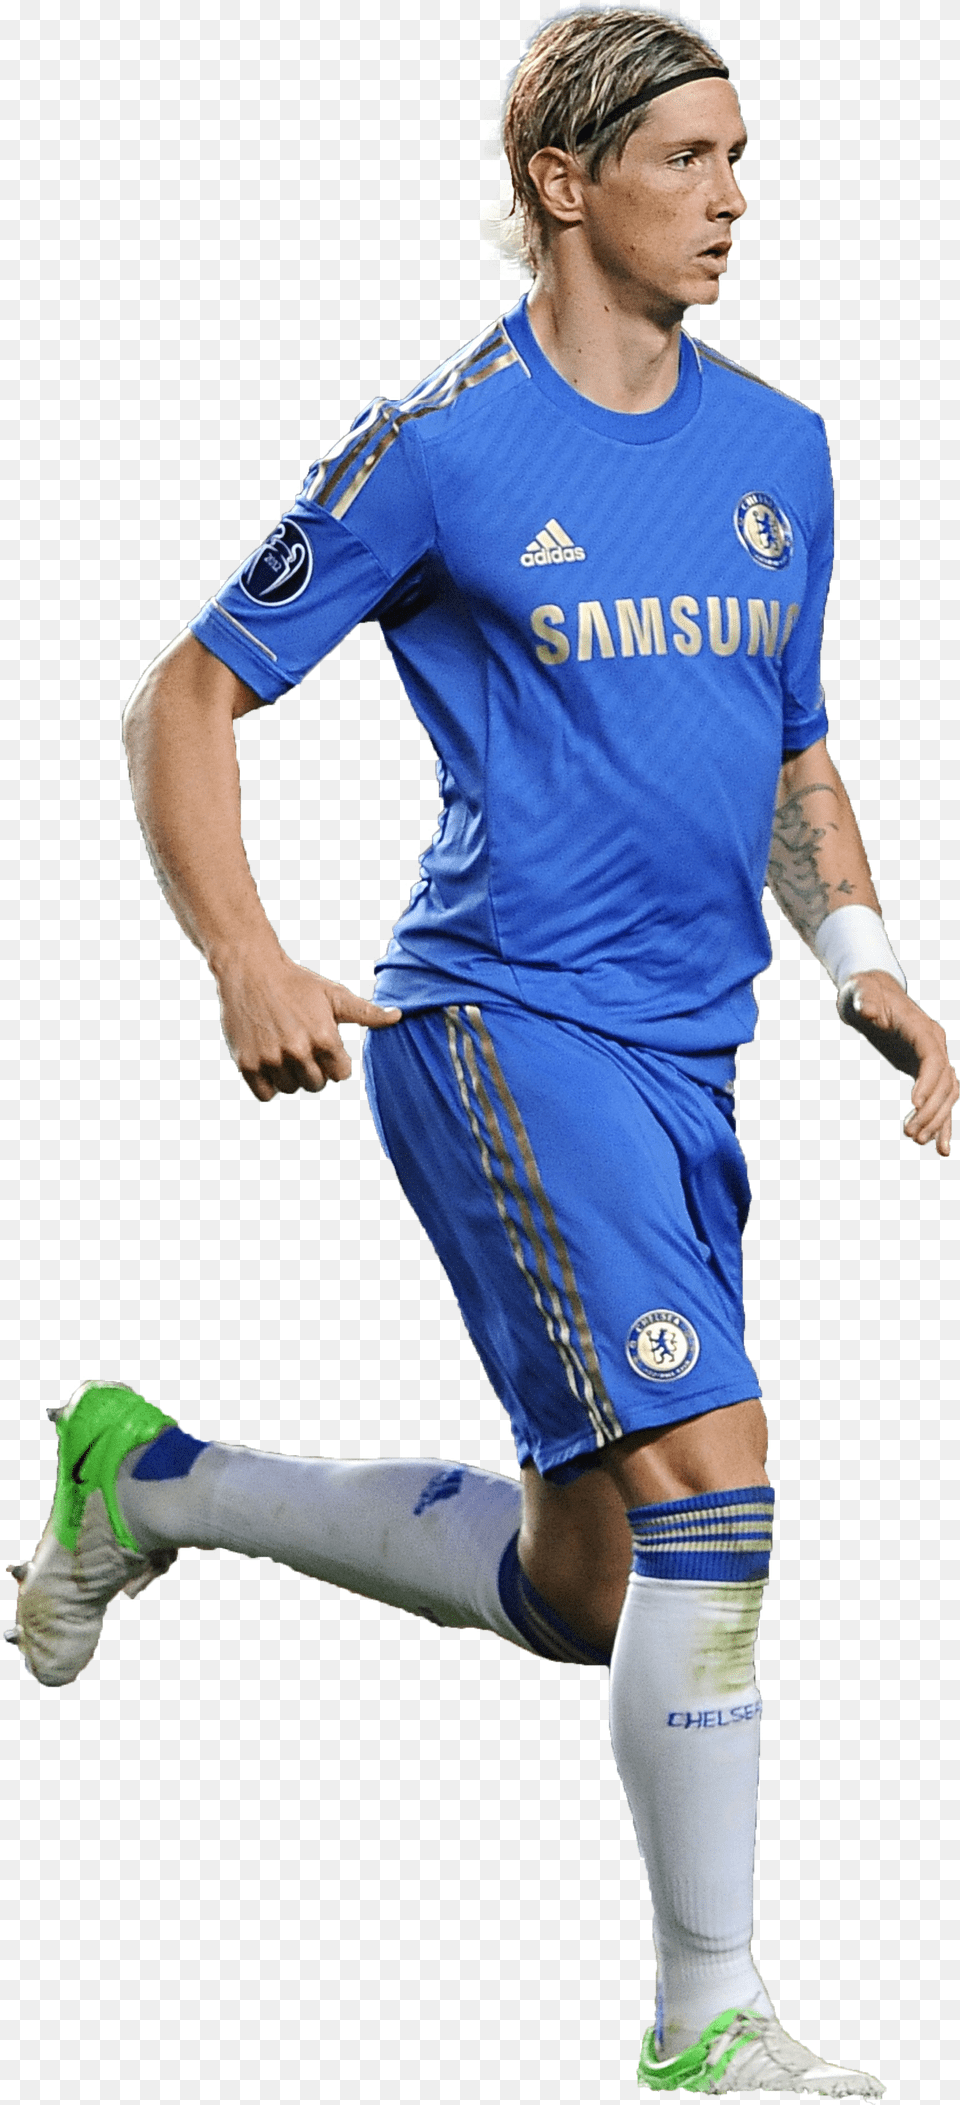 Download Fernando Torres Kick Up A Soccer Ball Full Size Football Player Png